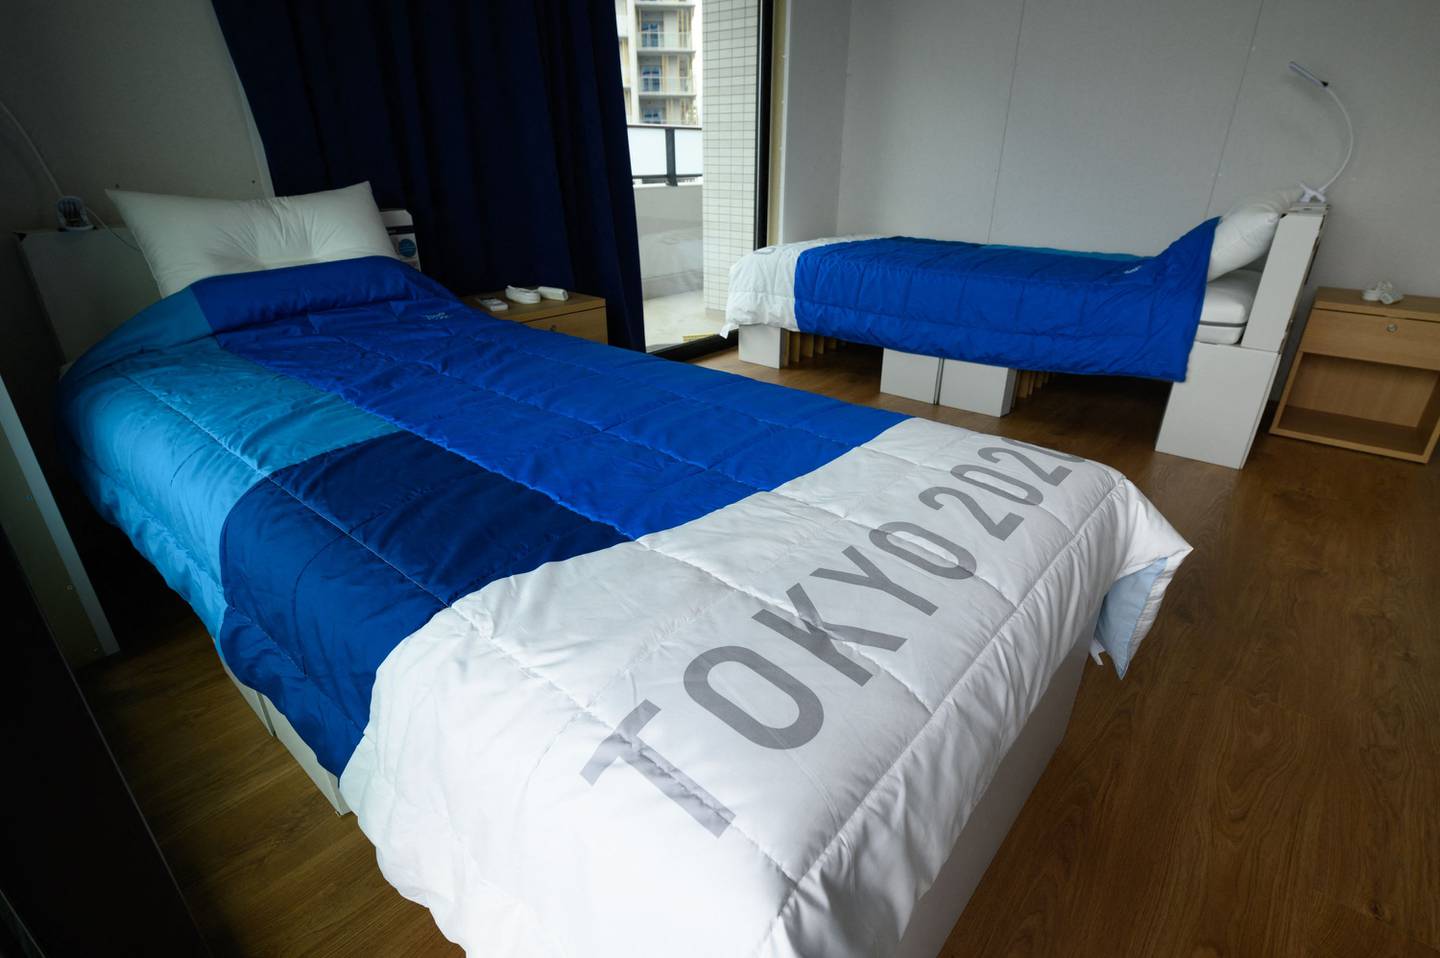 Recyclable cardboard beds and mattresses for athletes at the Olympic and Paralympic Village for the Tokyo 2020 Games. AFP